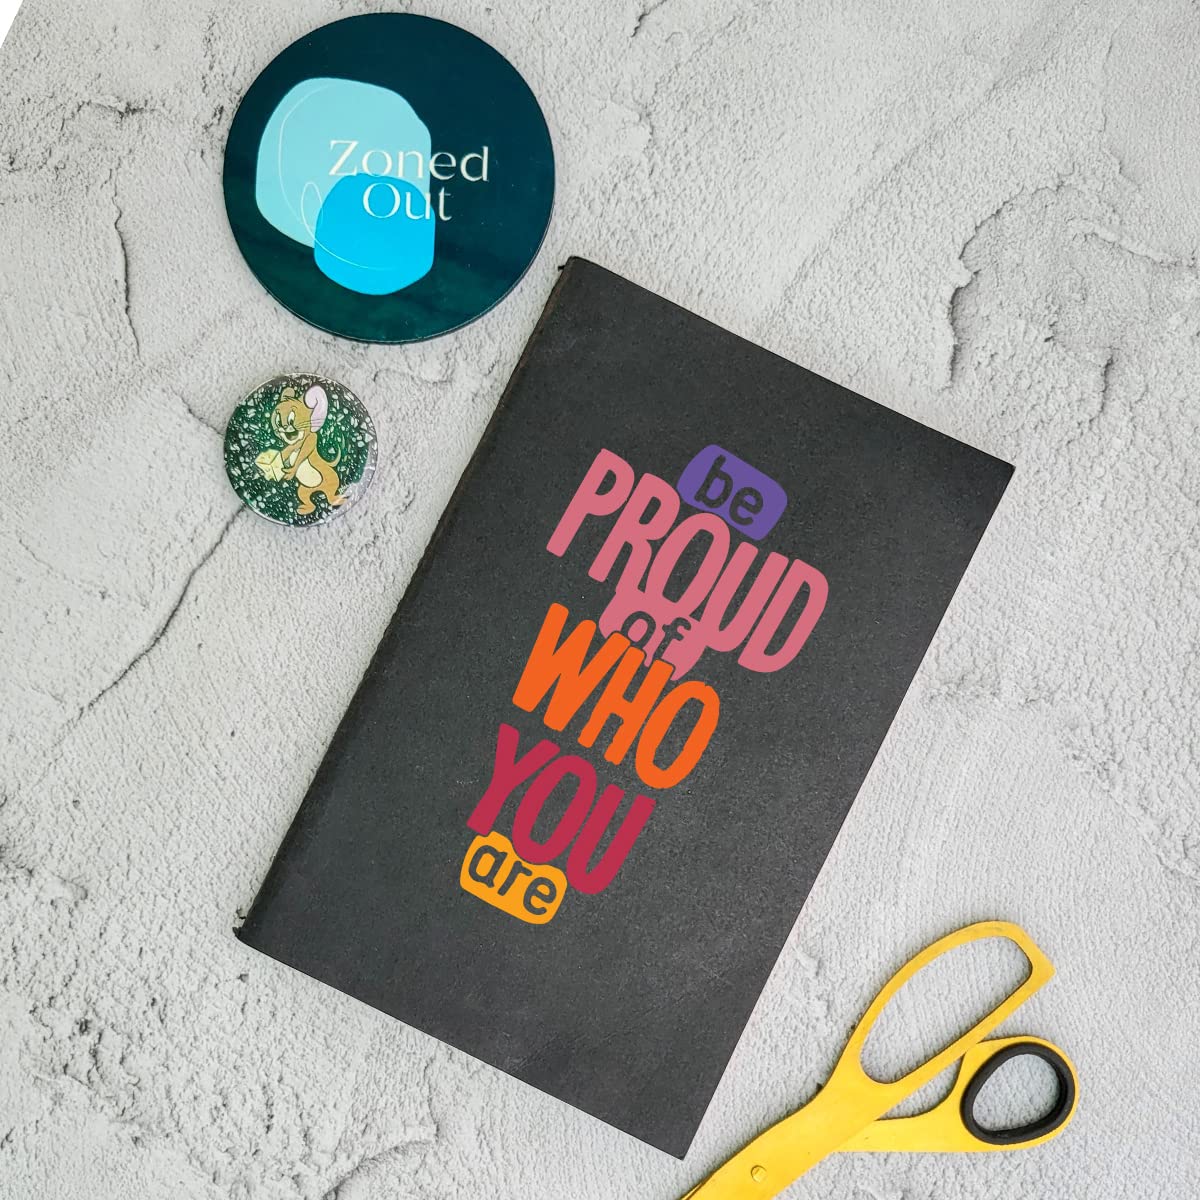 Be Proud Of Who You Are - Black A5 Doodle Notebook - Kraft Cover Notebook - A5 - 300 GSM Kraft Cover - Handmade - Unruled - 80 Pages - Natural Shade Pages 120 GSM - Funny Quotes & Quirky, Funky designs